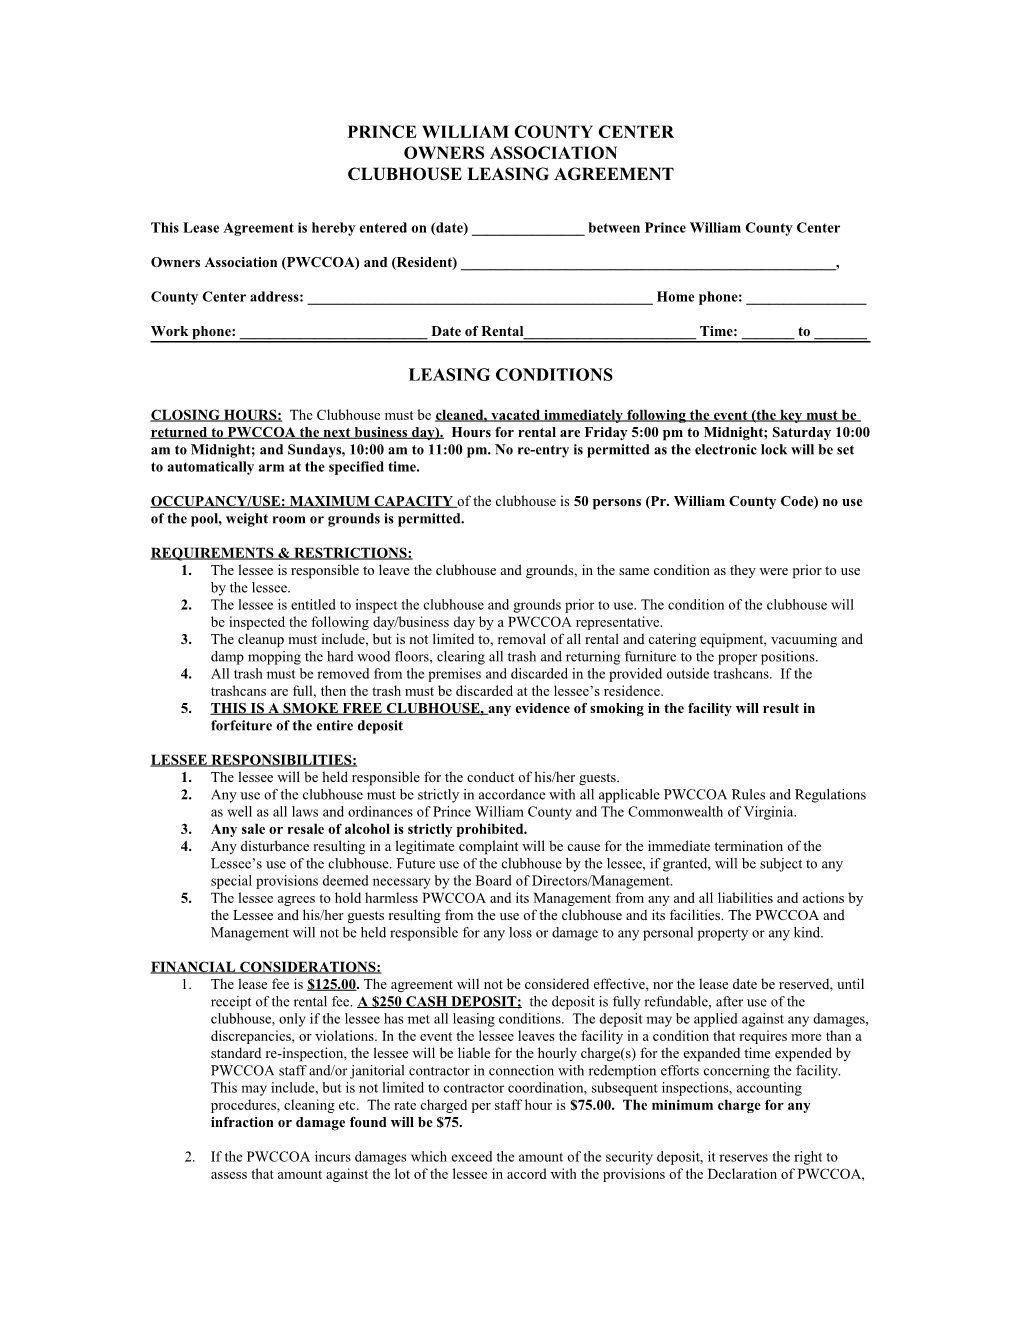 051206 Clubhouse Rental Agreement